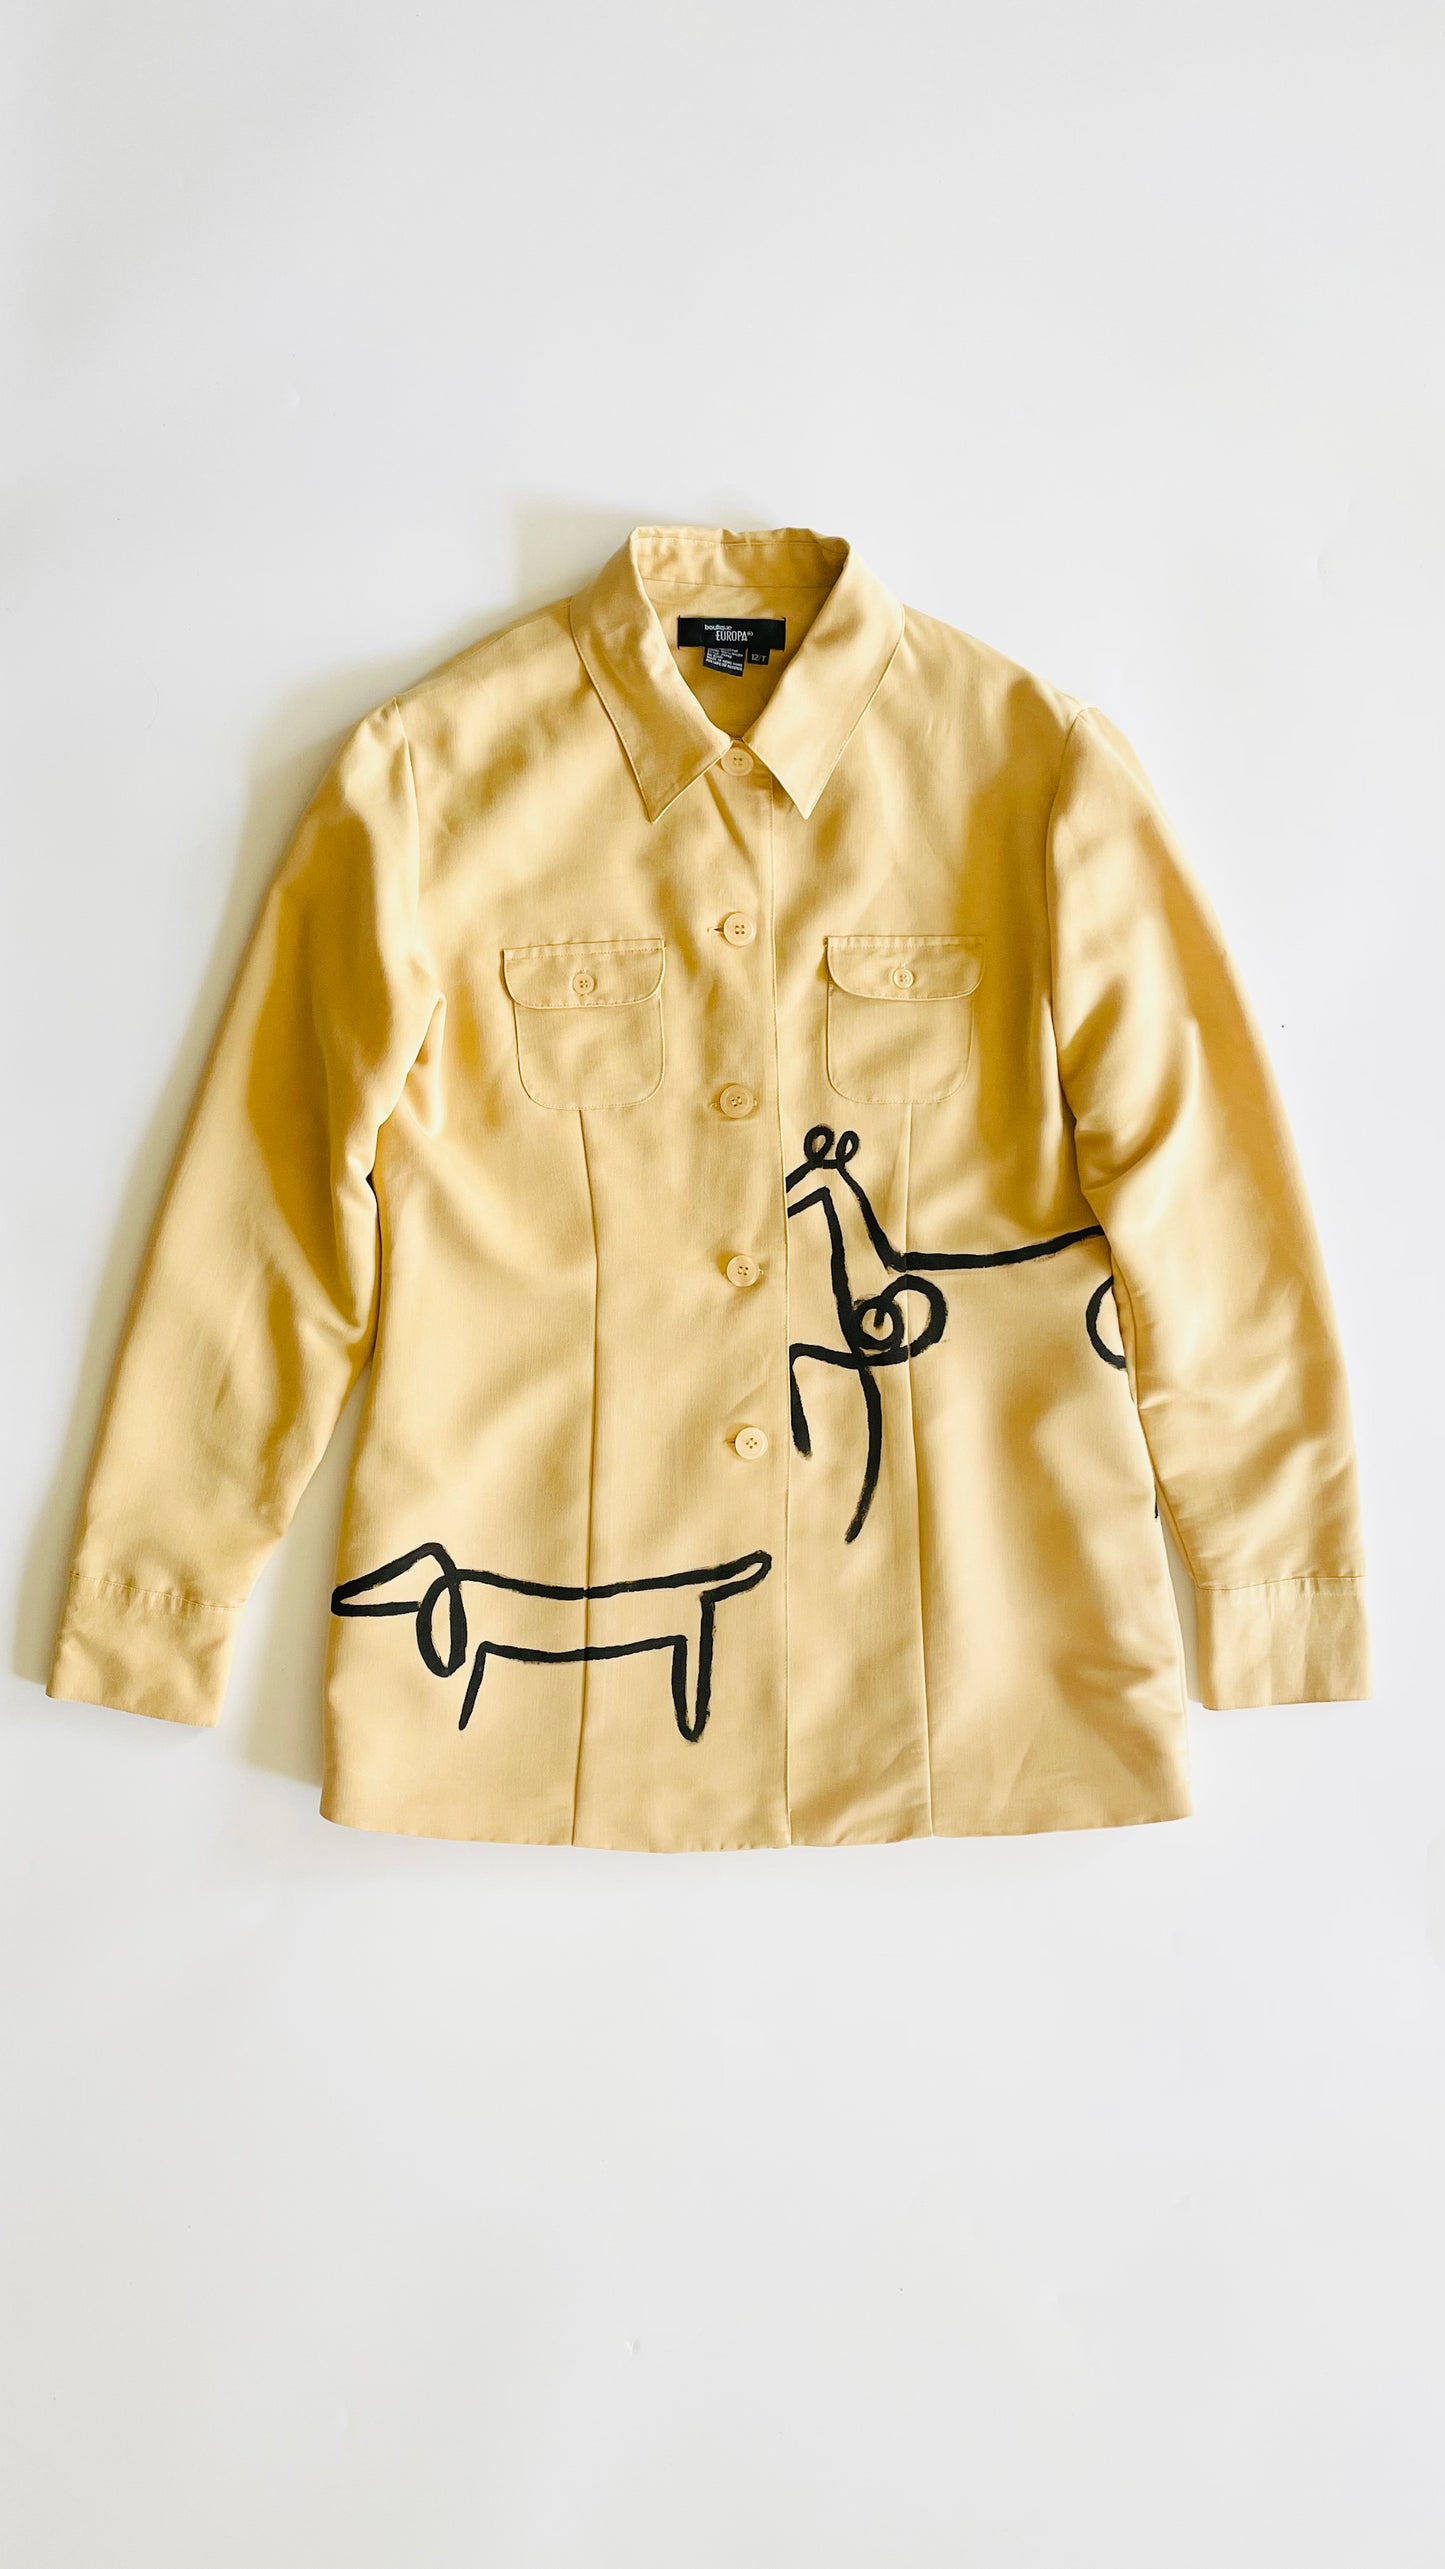 Repurposed button up shirt jacket - Picasso 2 - Size 12T